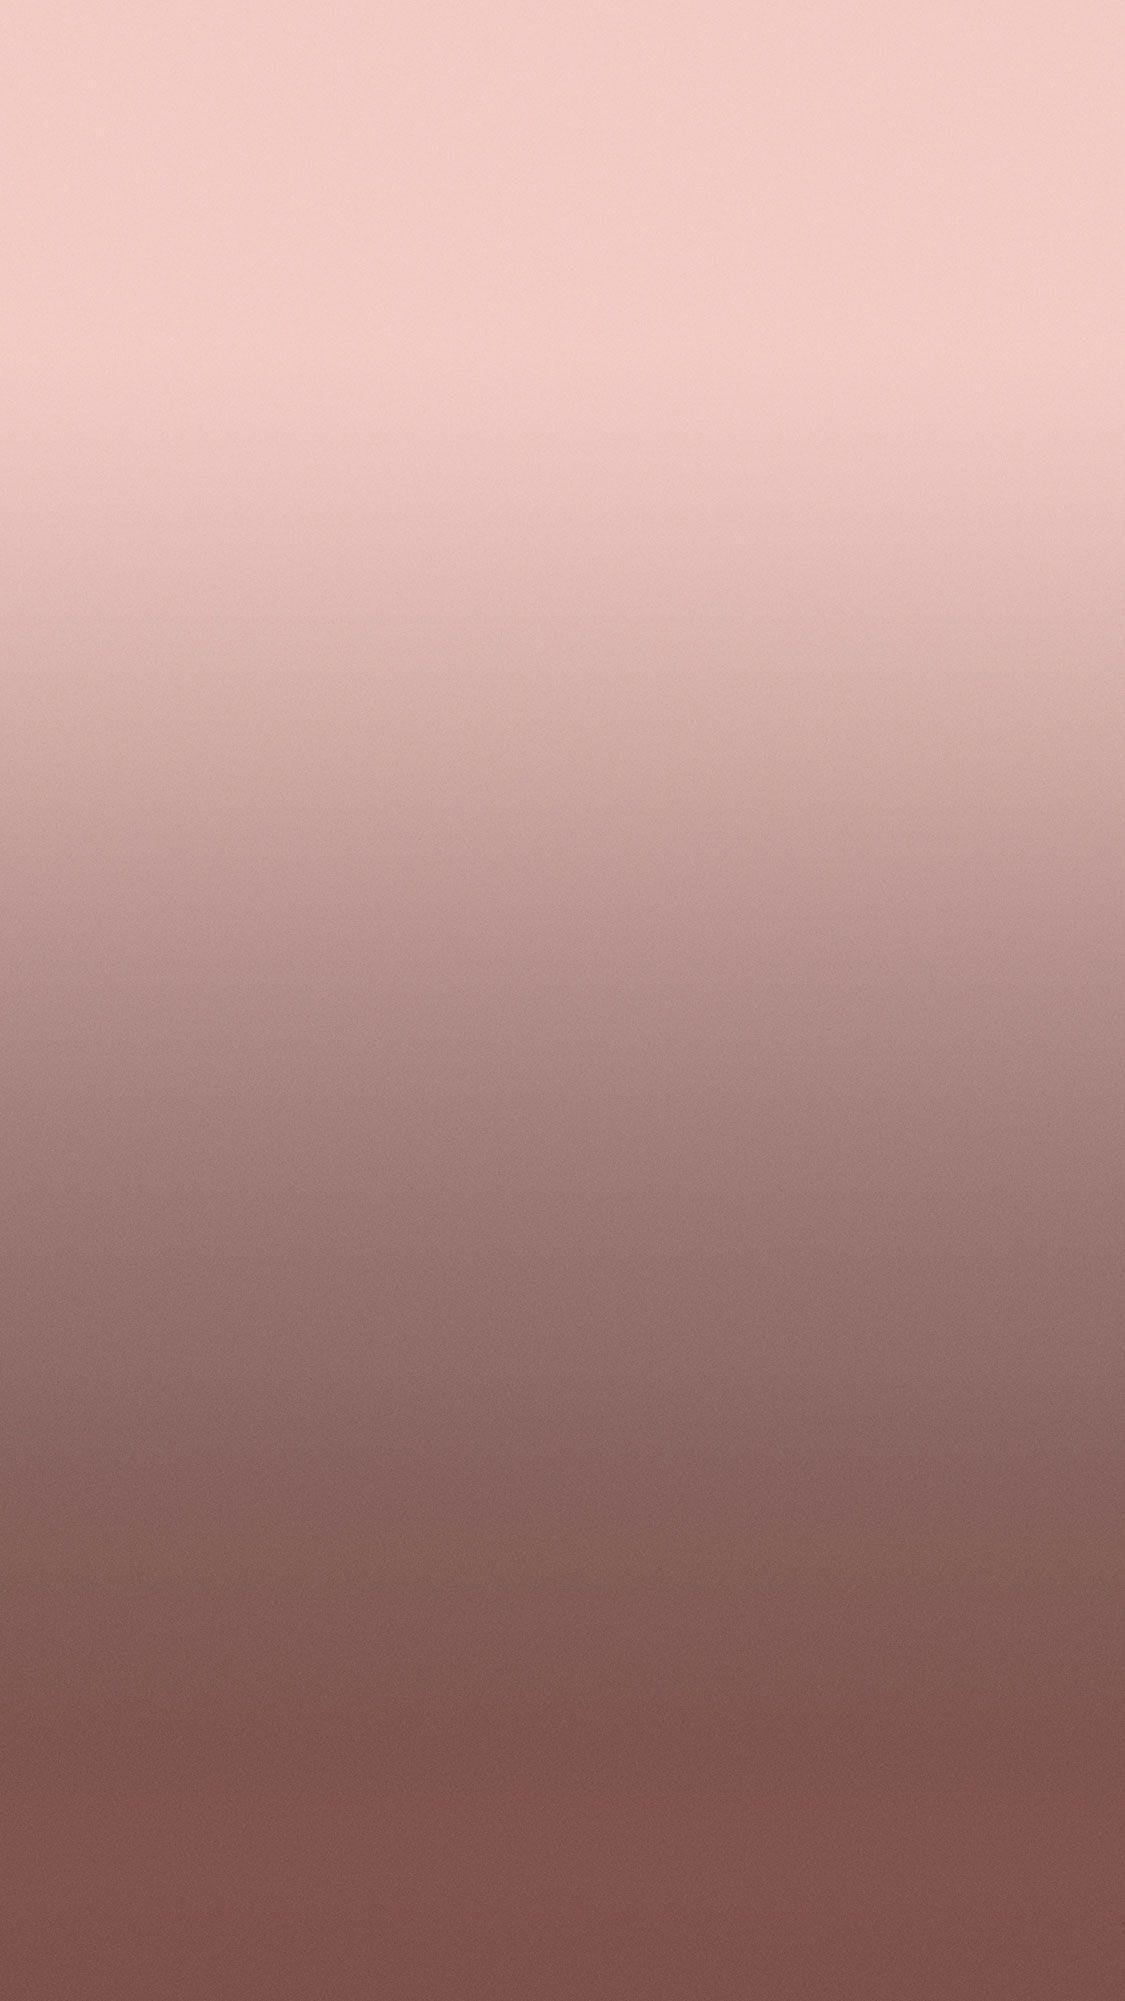 Rose Gold Iphone Backgrounds - HD Wallpaper 